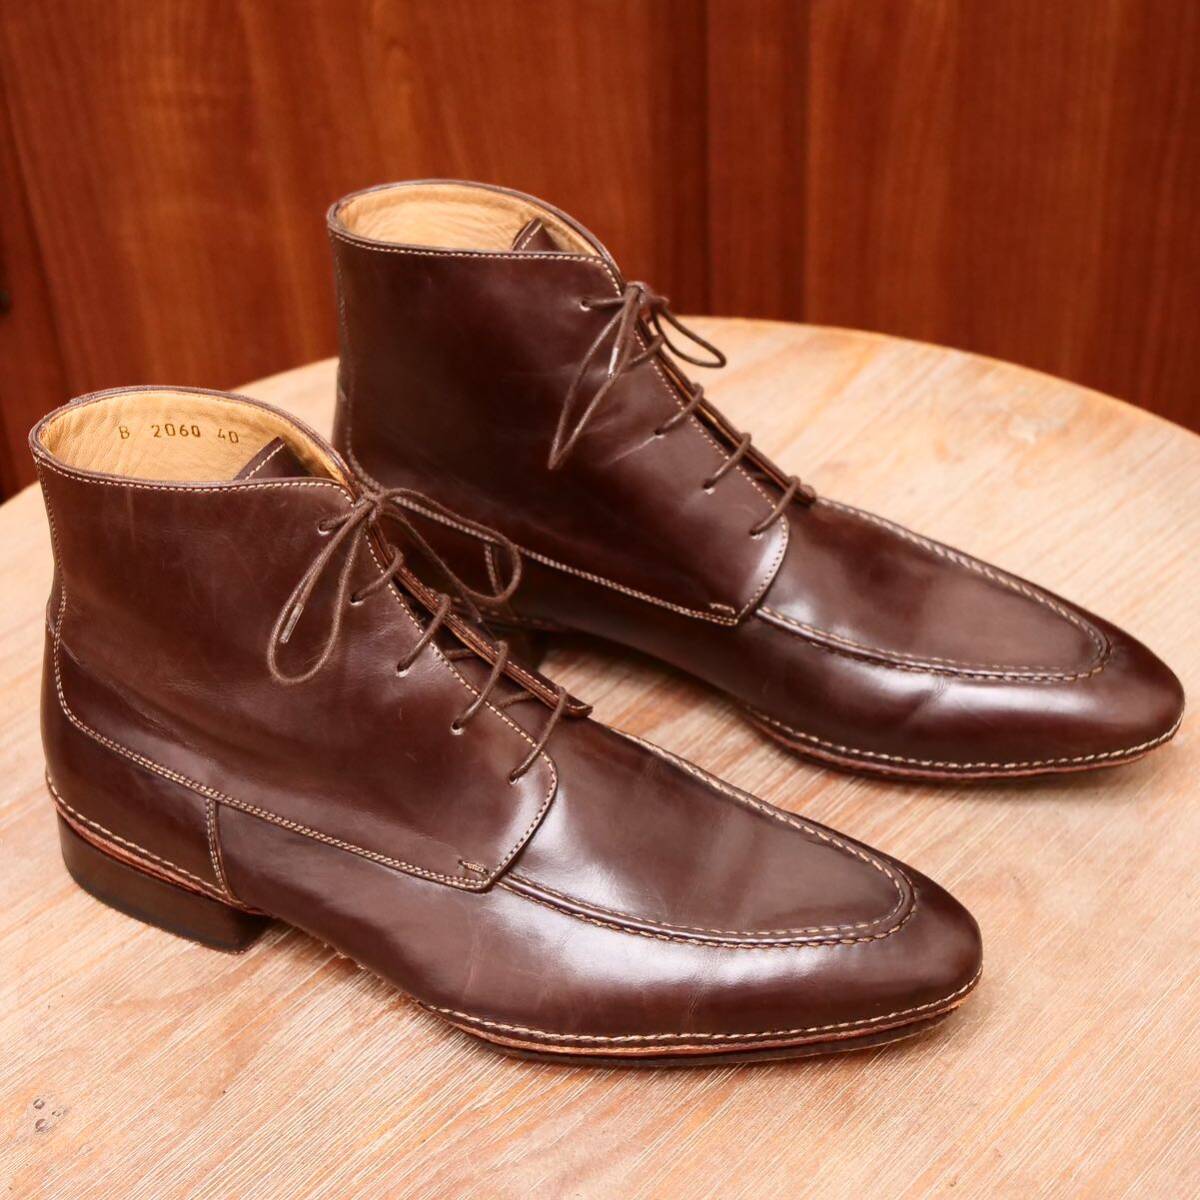  beautiful goods [ZENOBI]zenobi mocha ..5 hole boots Brown EU40 25.0cm rom and rear (before and after) business casual men's leather shoes 